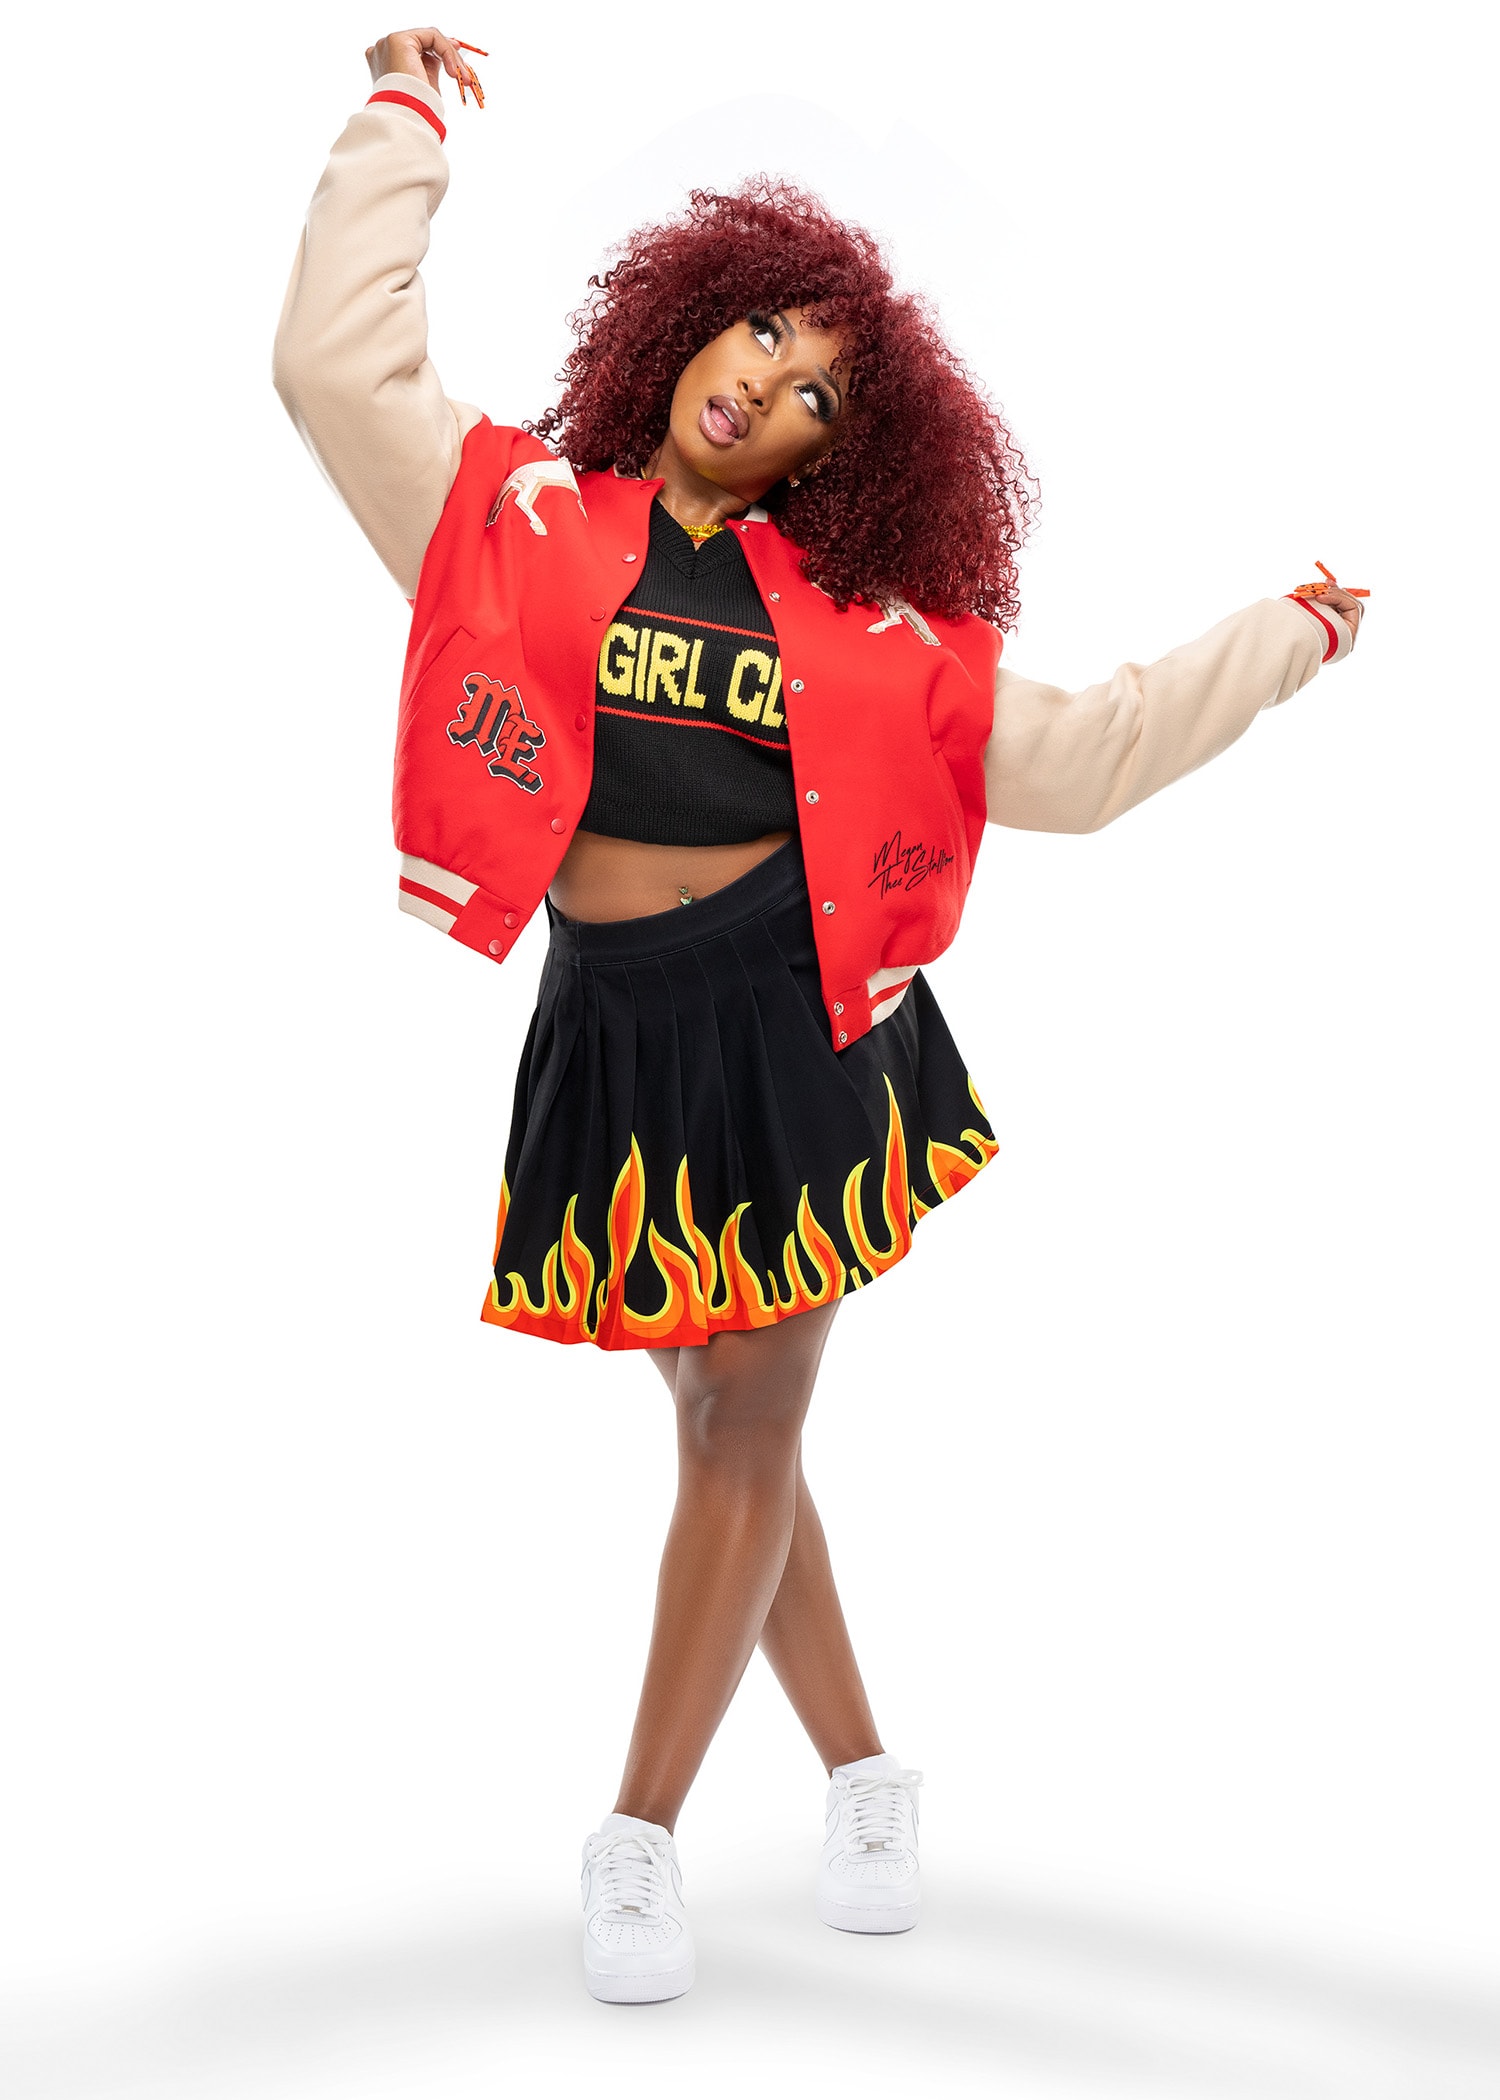 Megan Thee Stallion and Flamin' Hot Launch Flamin' Hot University Merch and Online Courses